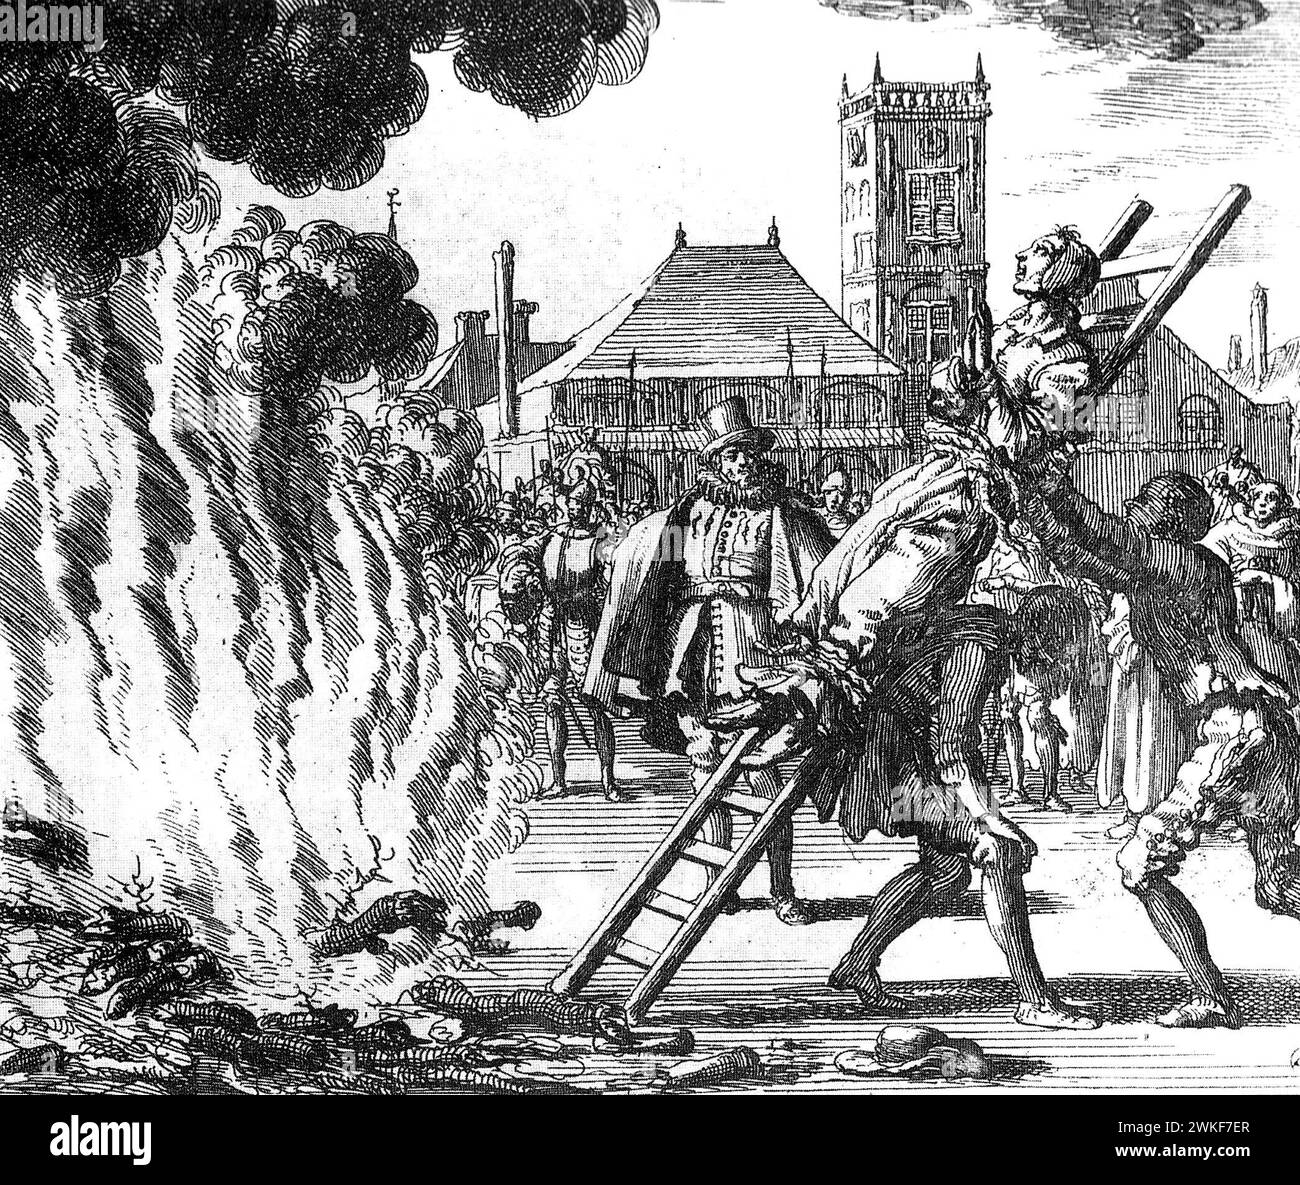 Spnish Inquisition. Anneken Hendriks, a Frisian Mennonite, burned in 1571 by the Spanish Inquisition. Engraving by Jan Luyken, 1685 Stock Photo